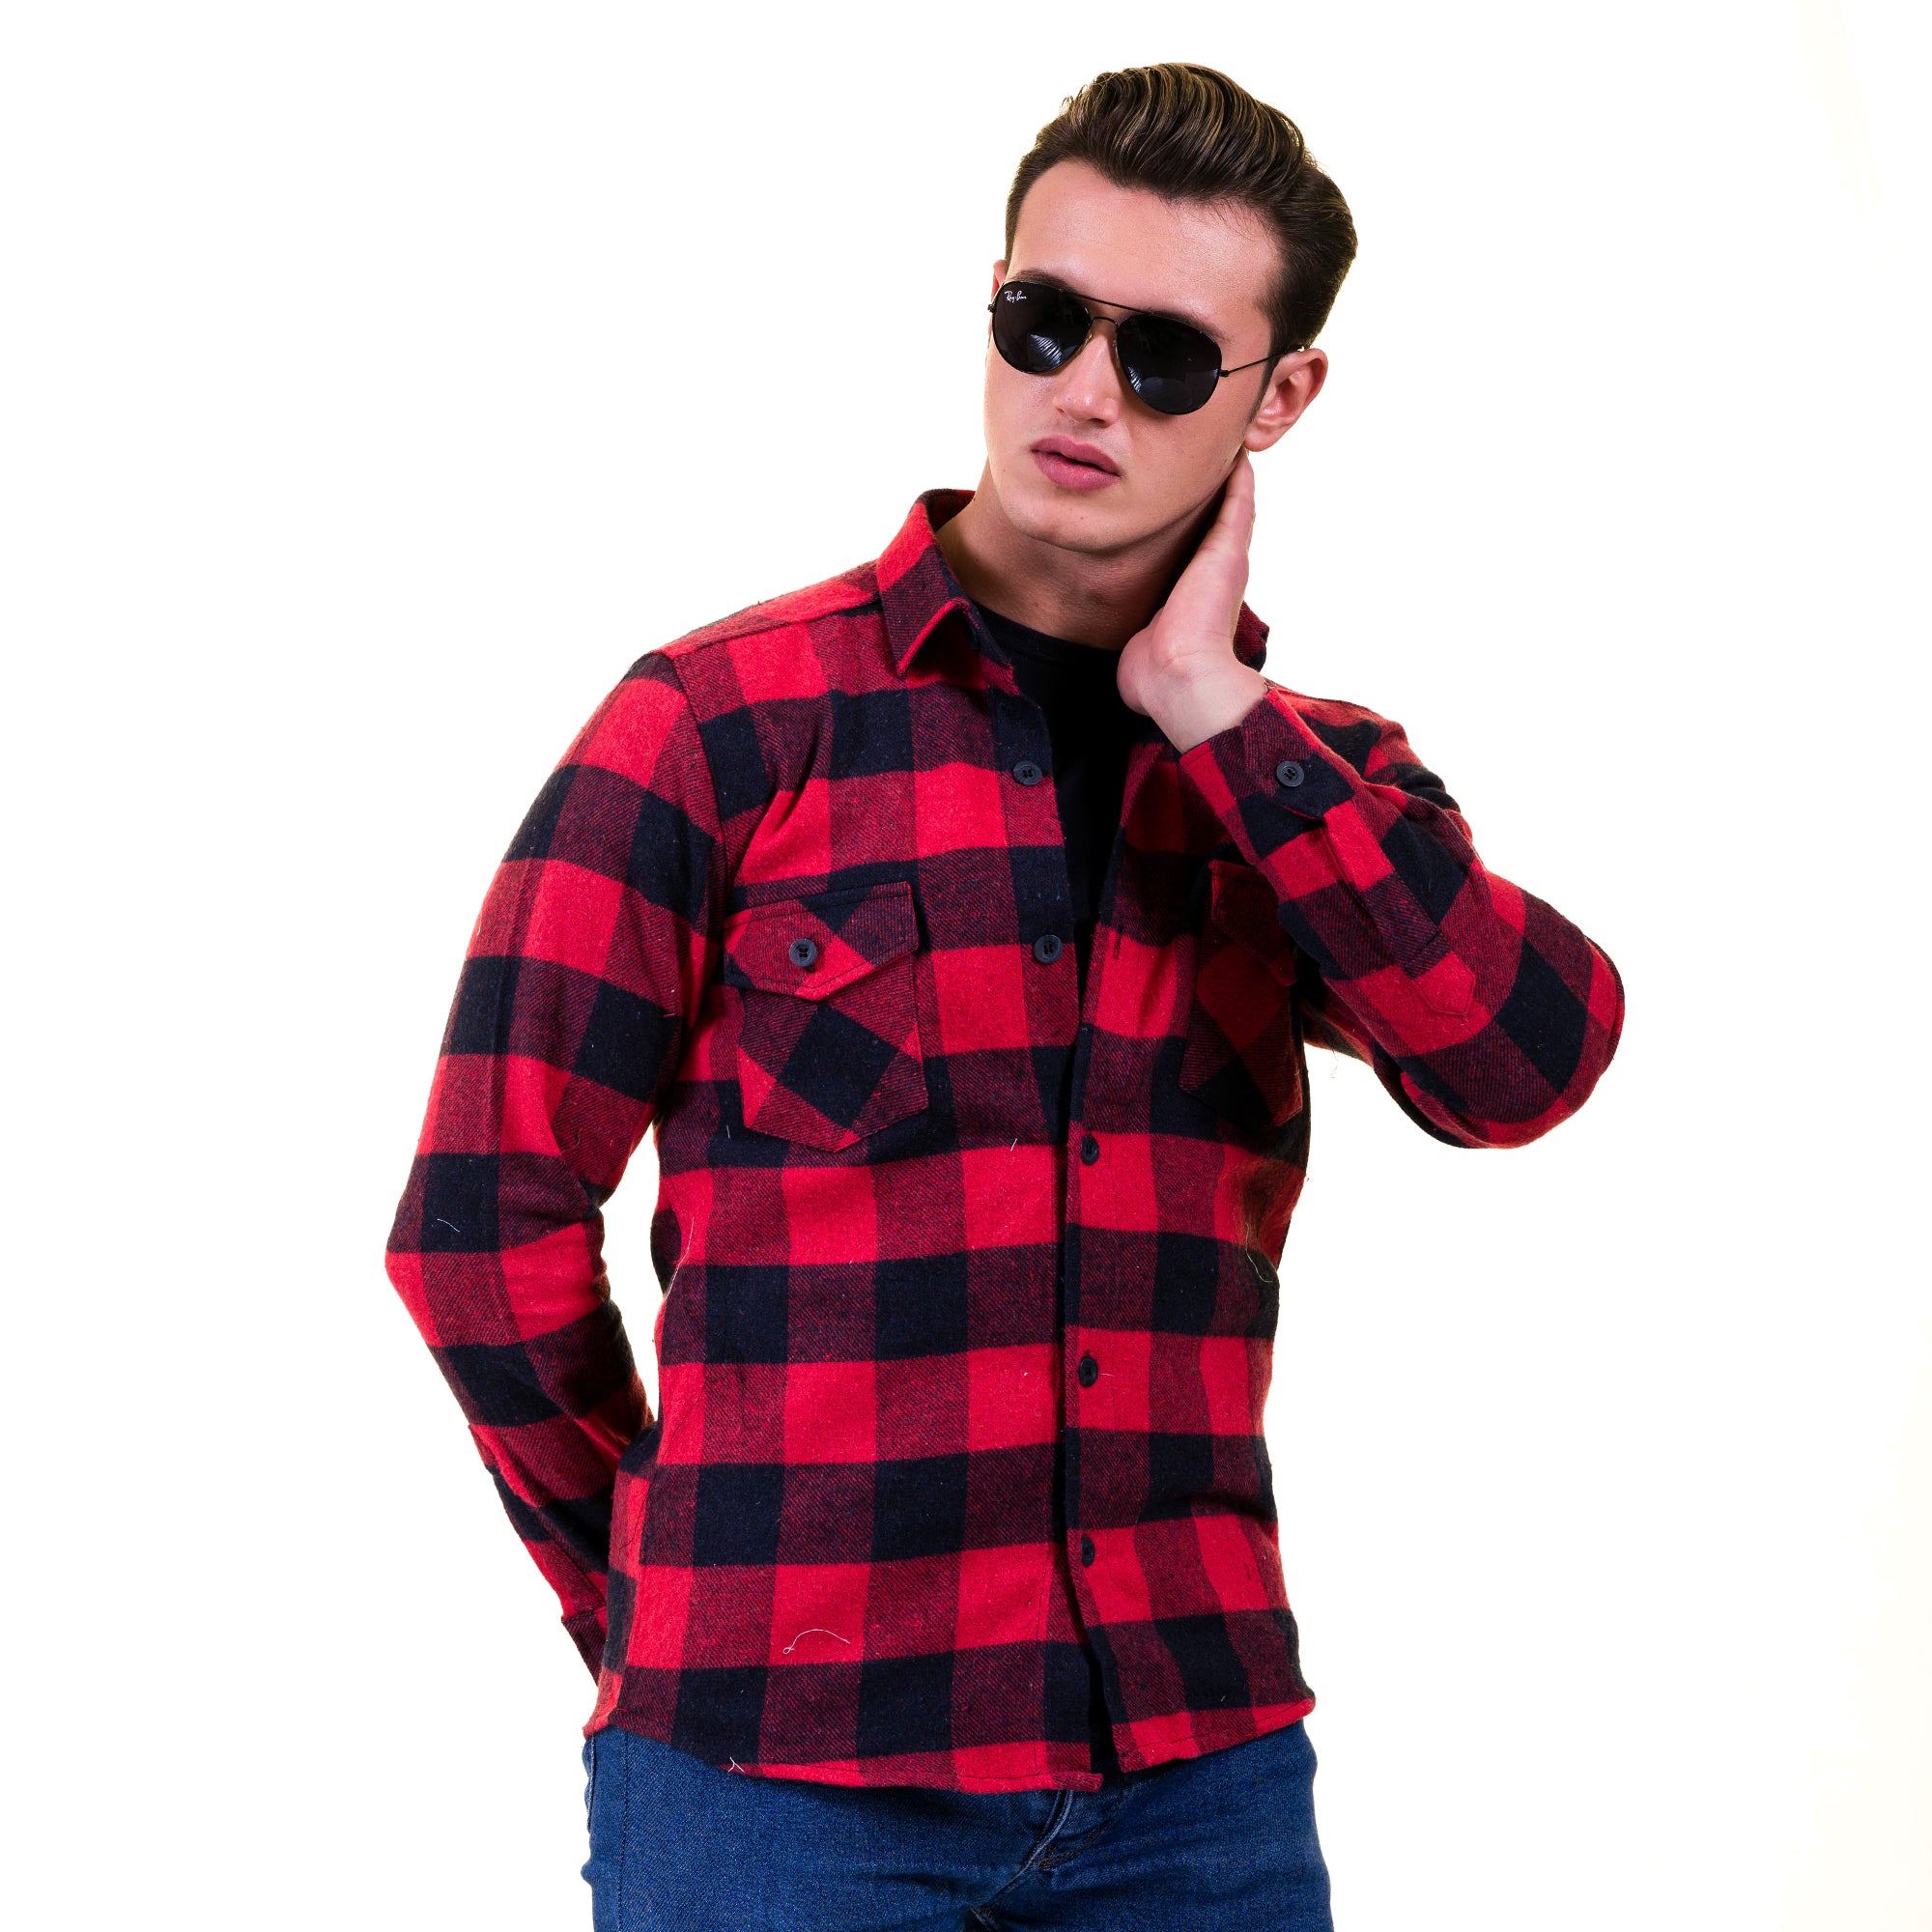 Red Black Check Mens Slim Fit Designer Dress Shirt - tailored Cotton Shirts for Work and Casual Wear